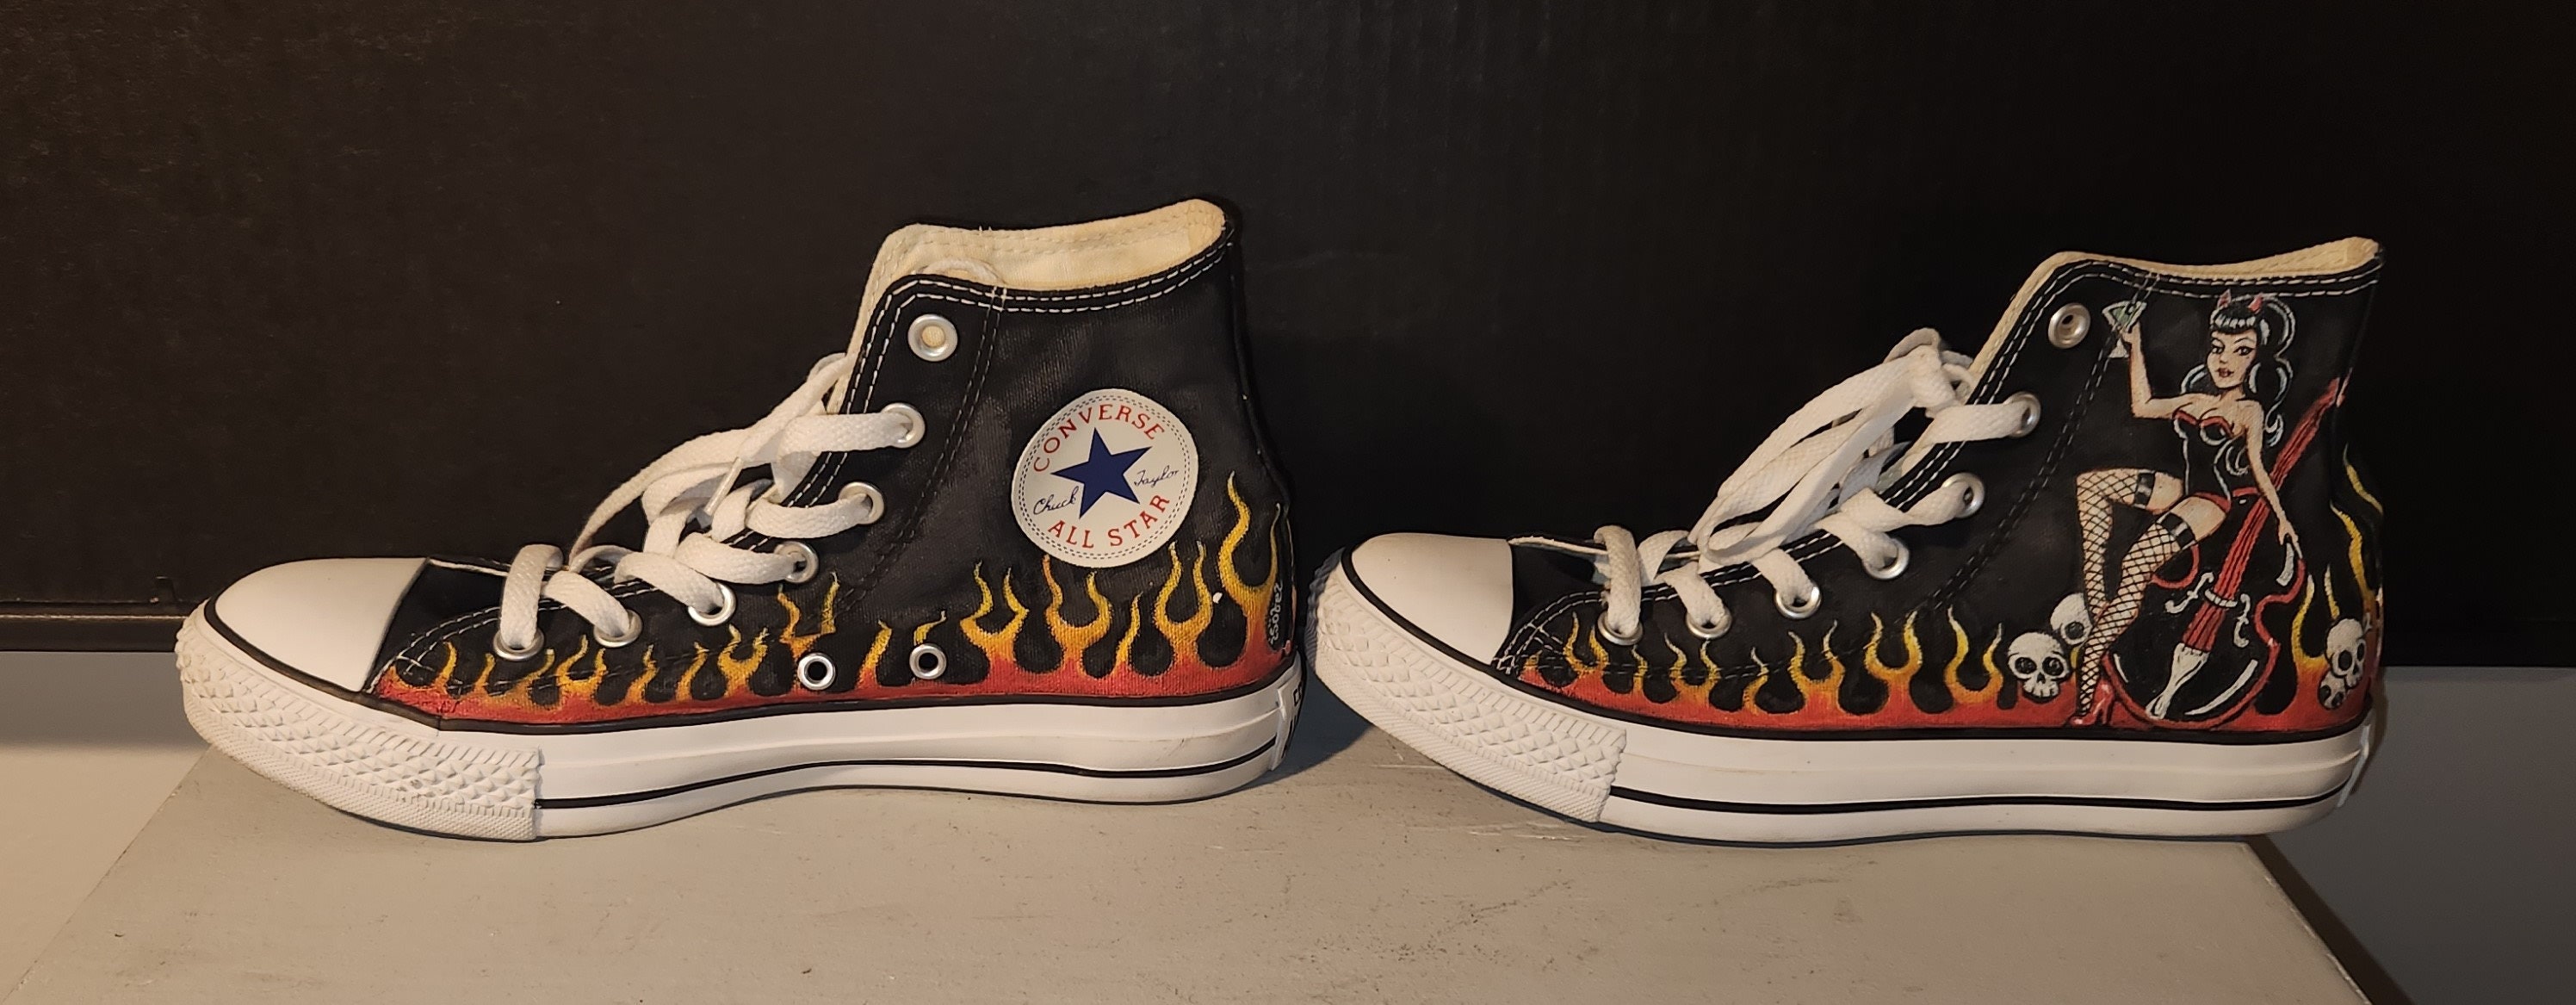 Black Converse With Hand-painted Flames, Rockabilly Retro Style Chuck  Taylors, 50s Swing Dance Shoes for Men or Women 